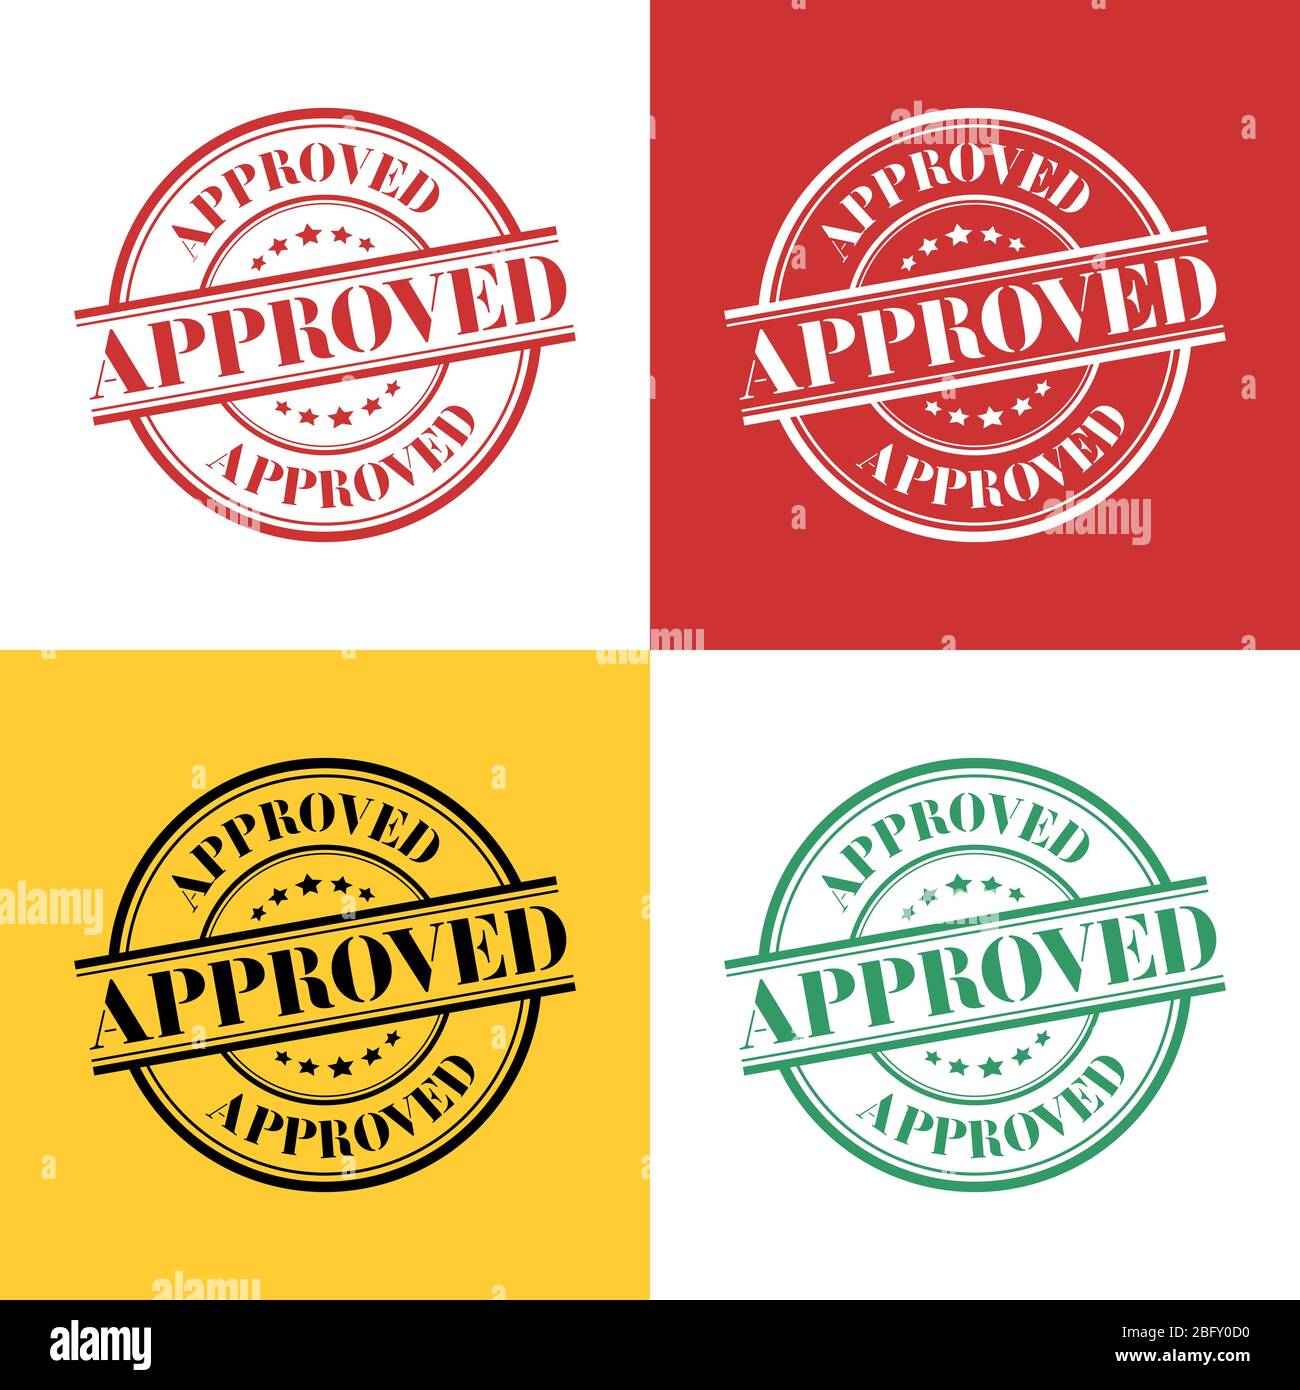 Approved, round vector icon, transparent in four colors. Approval label Stock Vector